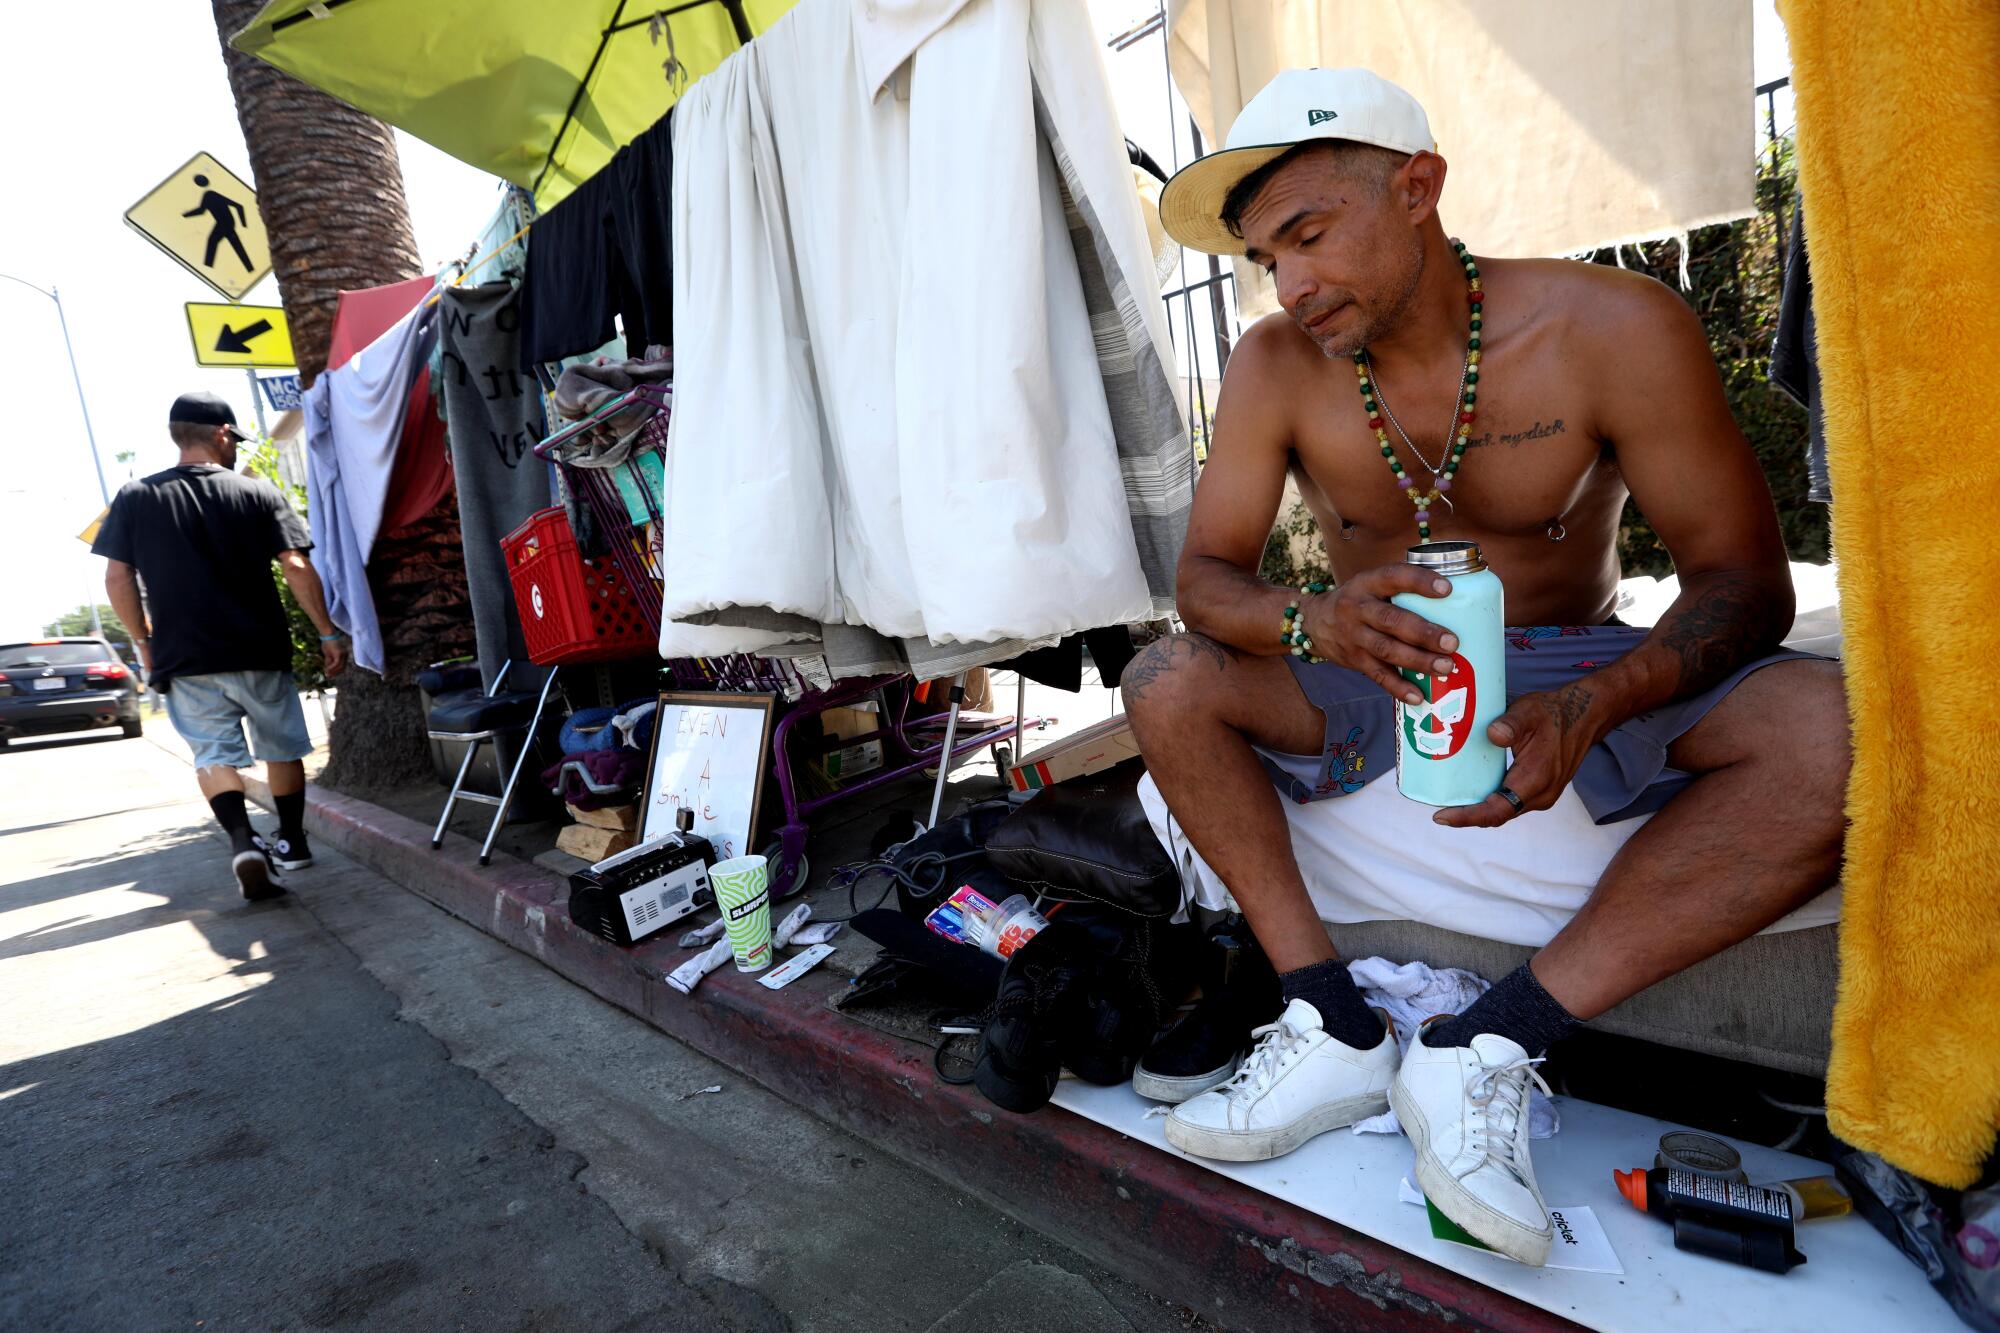 Shirtless man holds a drink while sitting in homeless encampment along the street. 